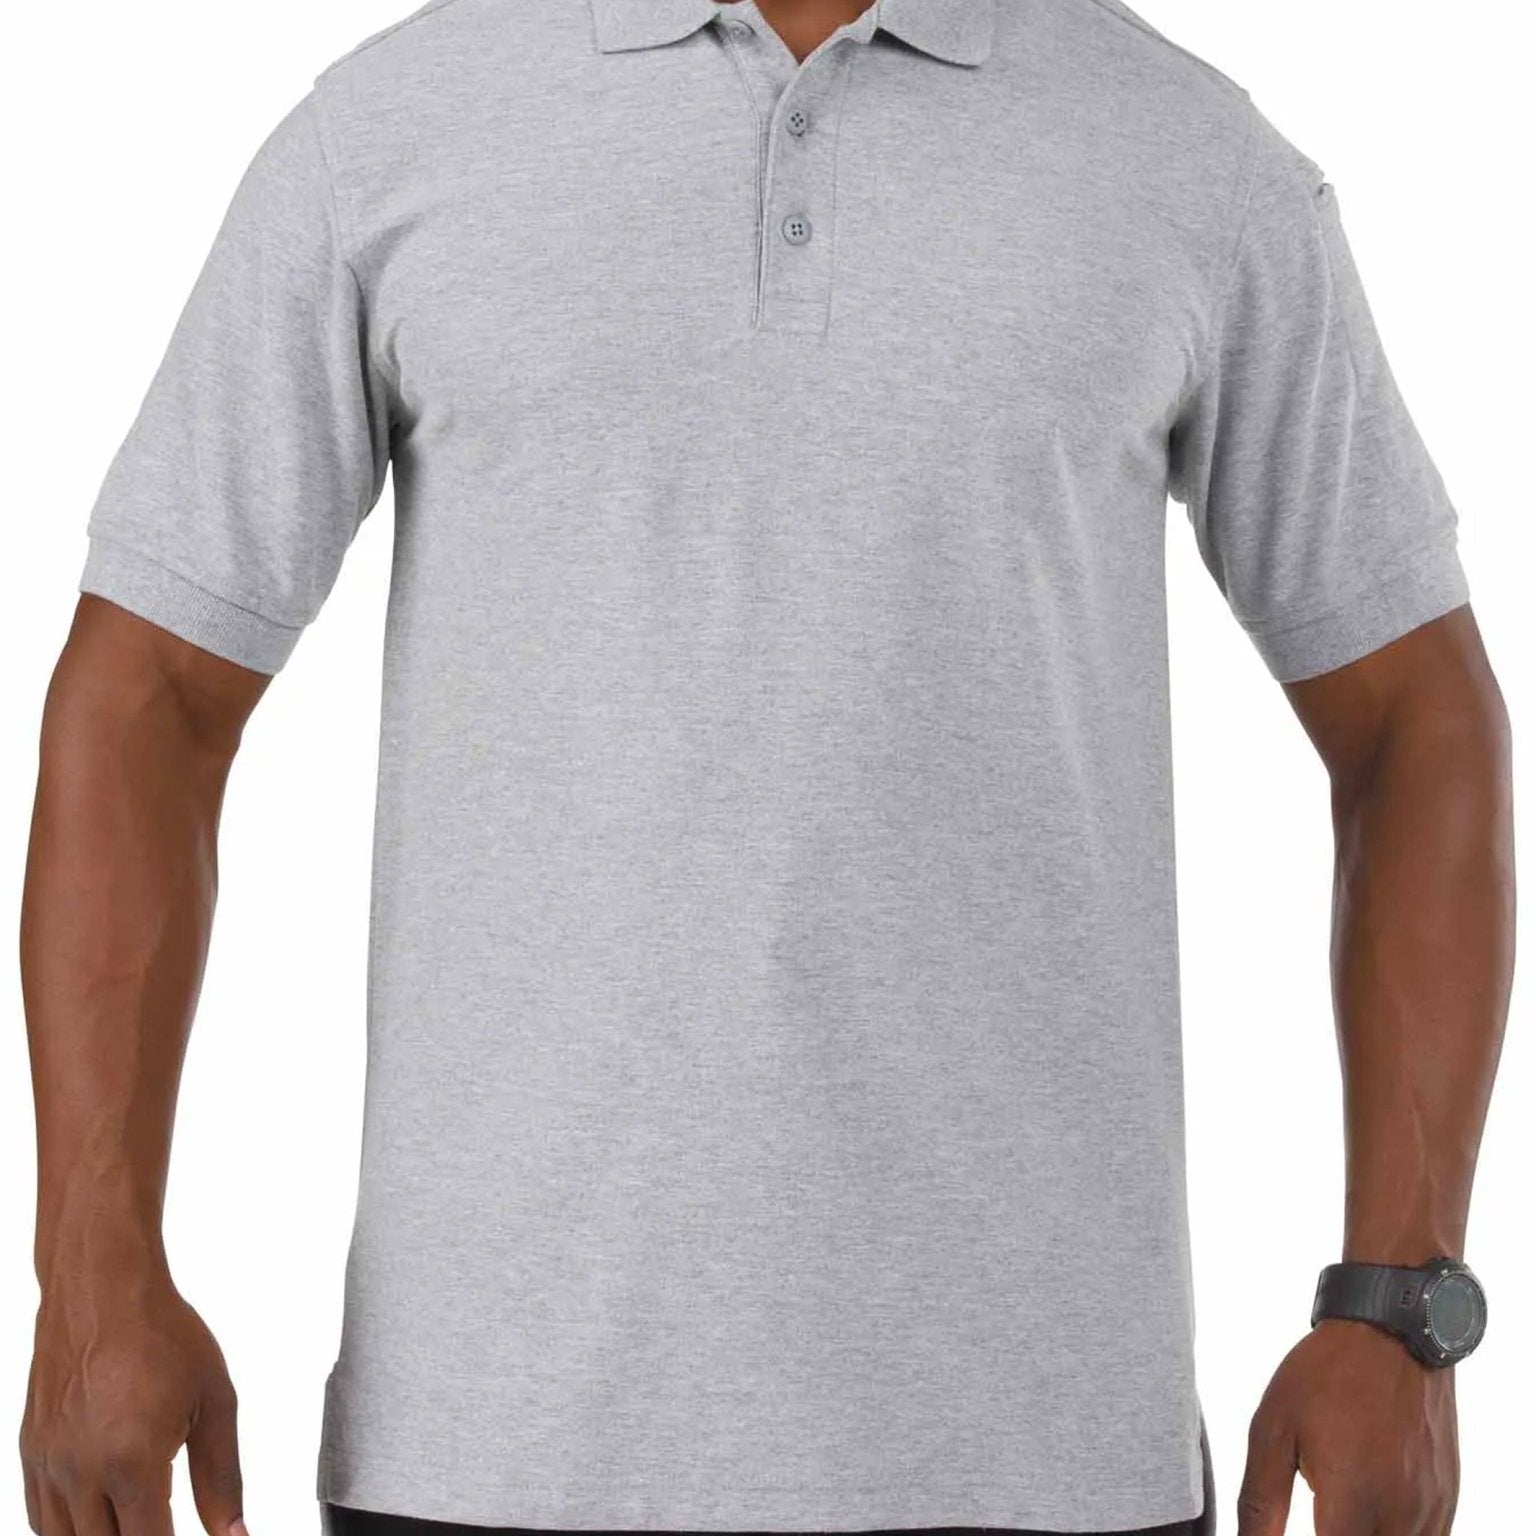 4elementsclothing5.11 Tactical5.11 Tactical - 5.11 Utility Short Sleeve Polo Shirt - Cotton / Polyester Pique - Style 41180T-Shirt41180-016-XS